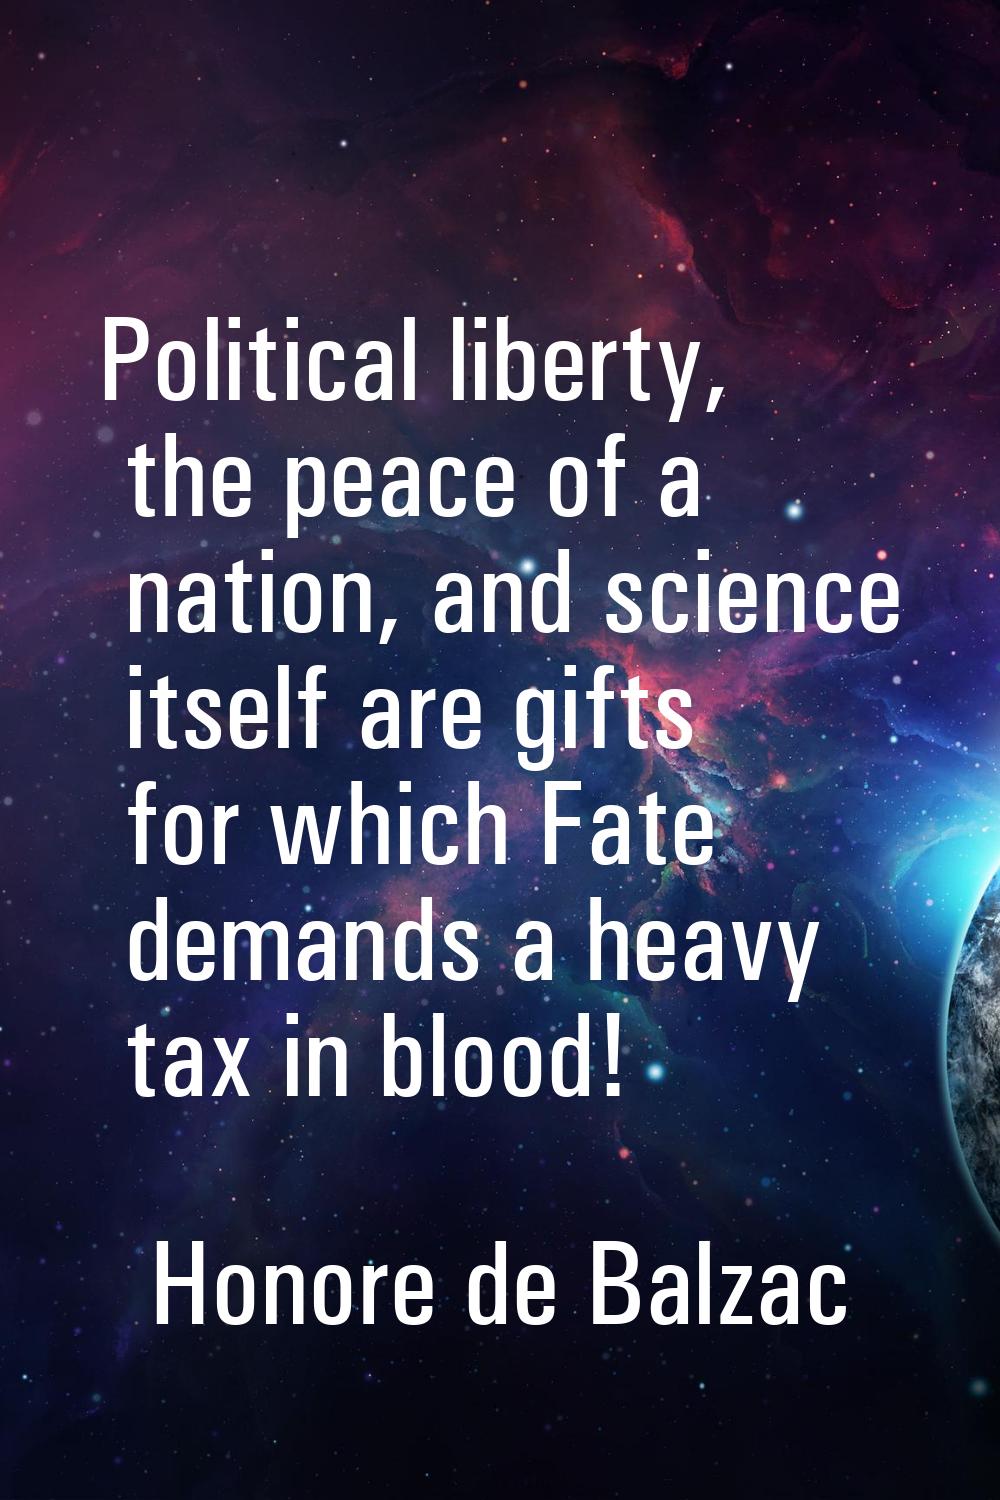 Political liberty, the peace of a nation, and science itself are gifts for which Fate demands a hea